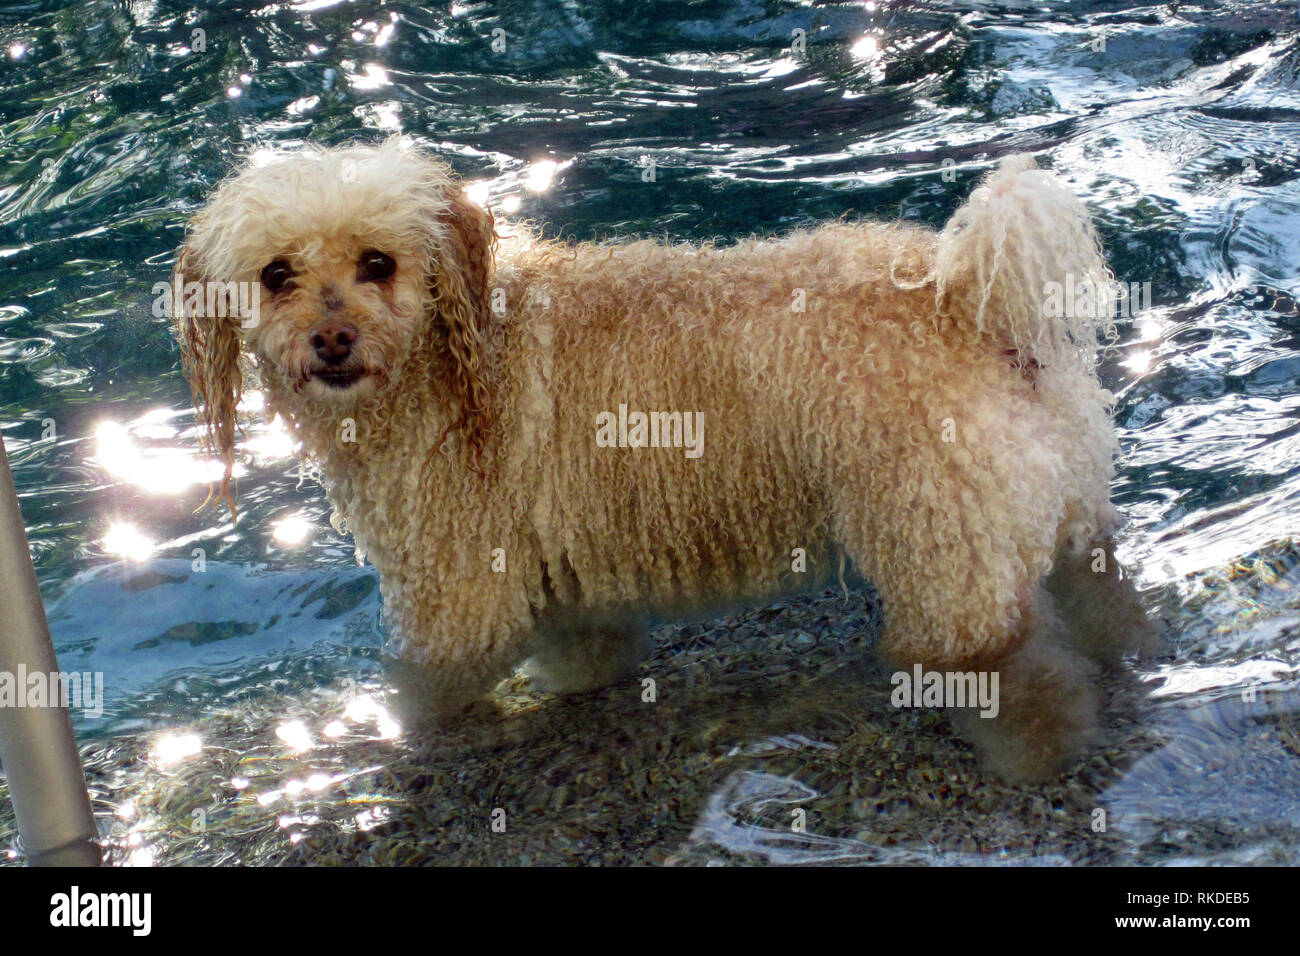 A white poodle plays in a pool. Stock Photo